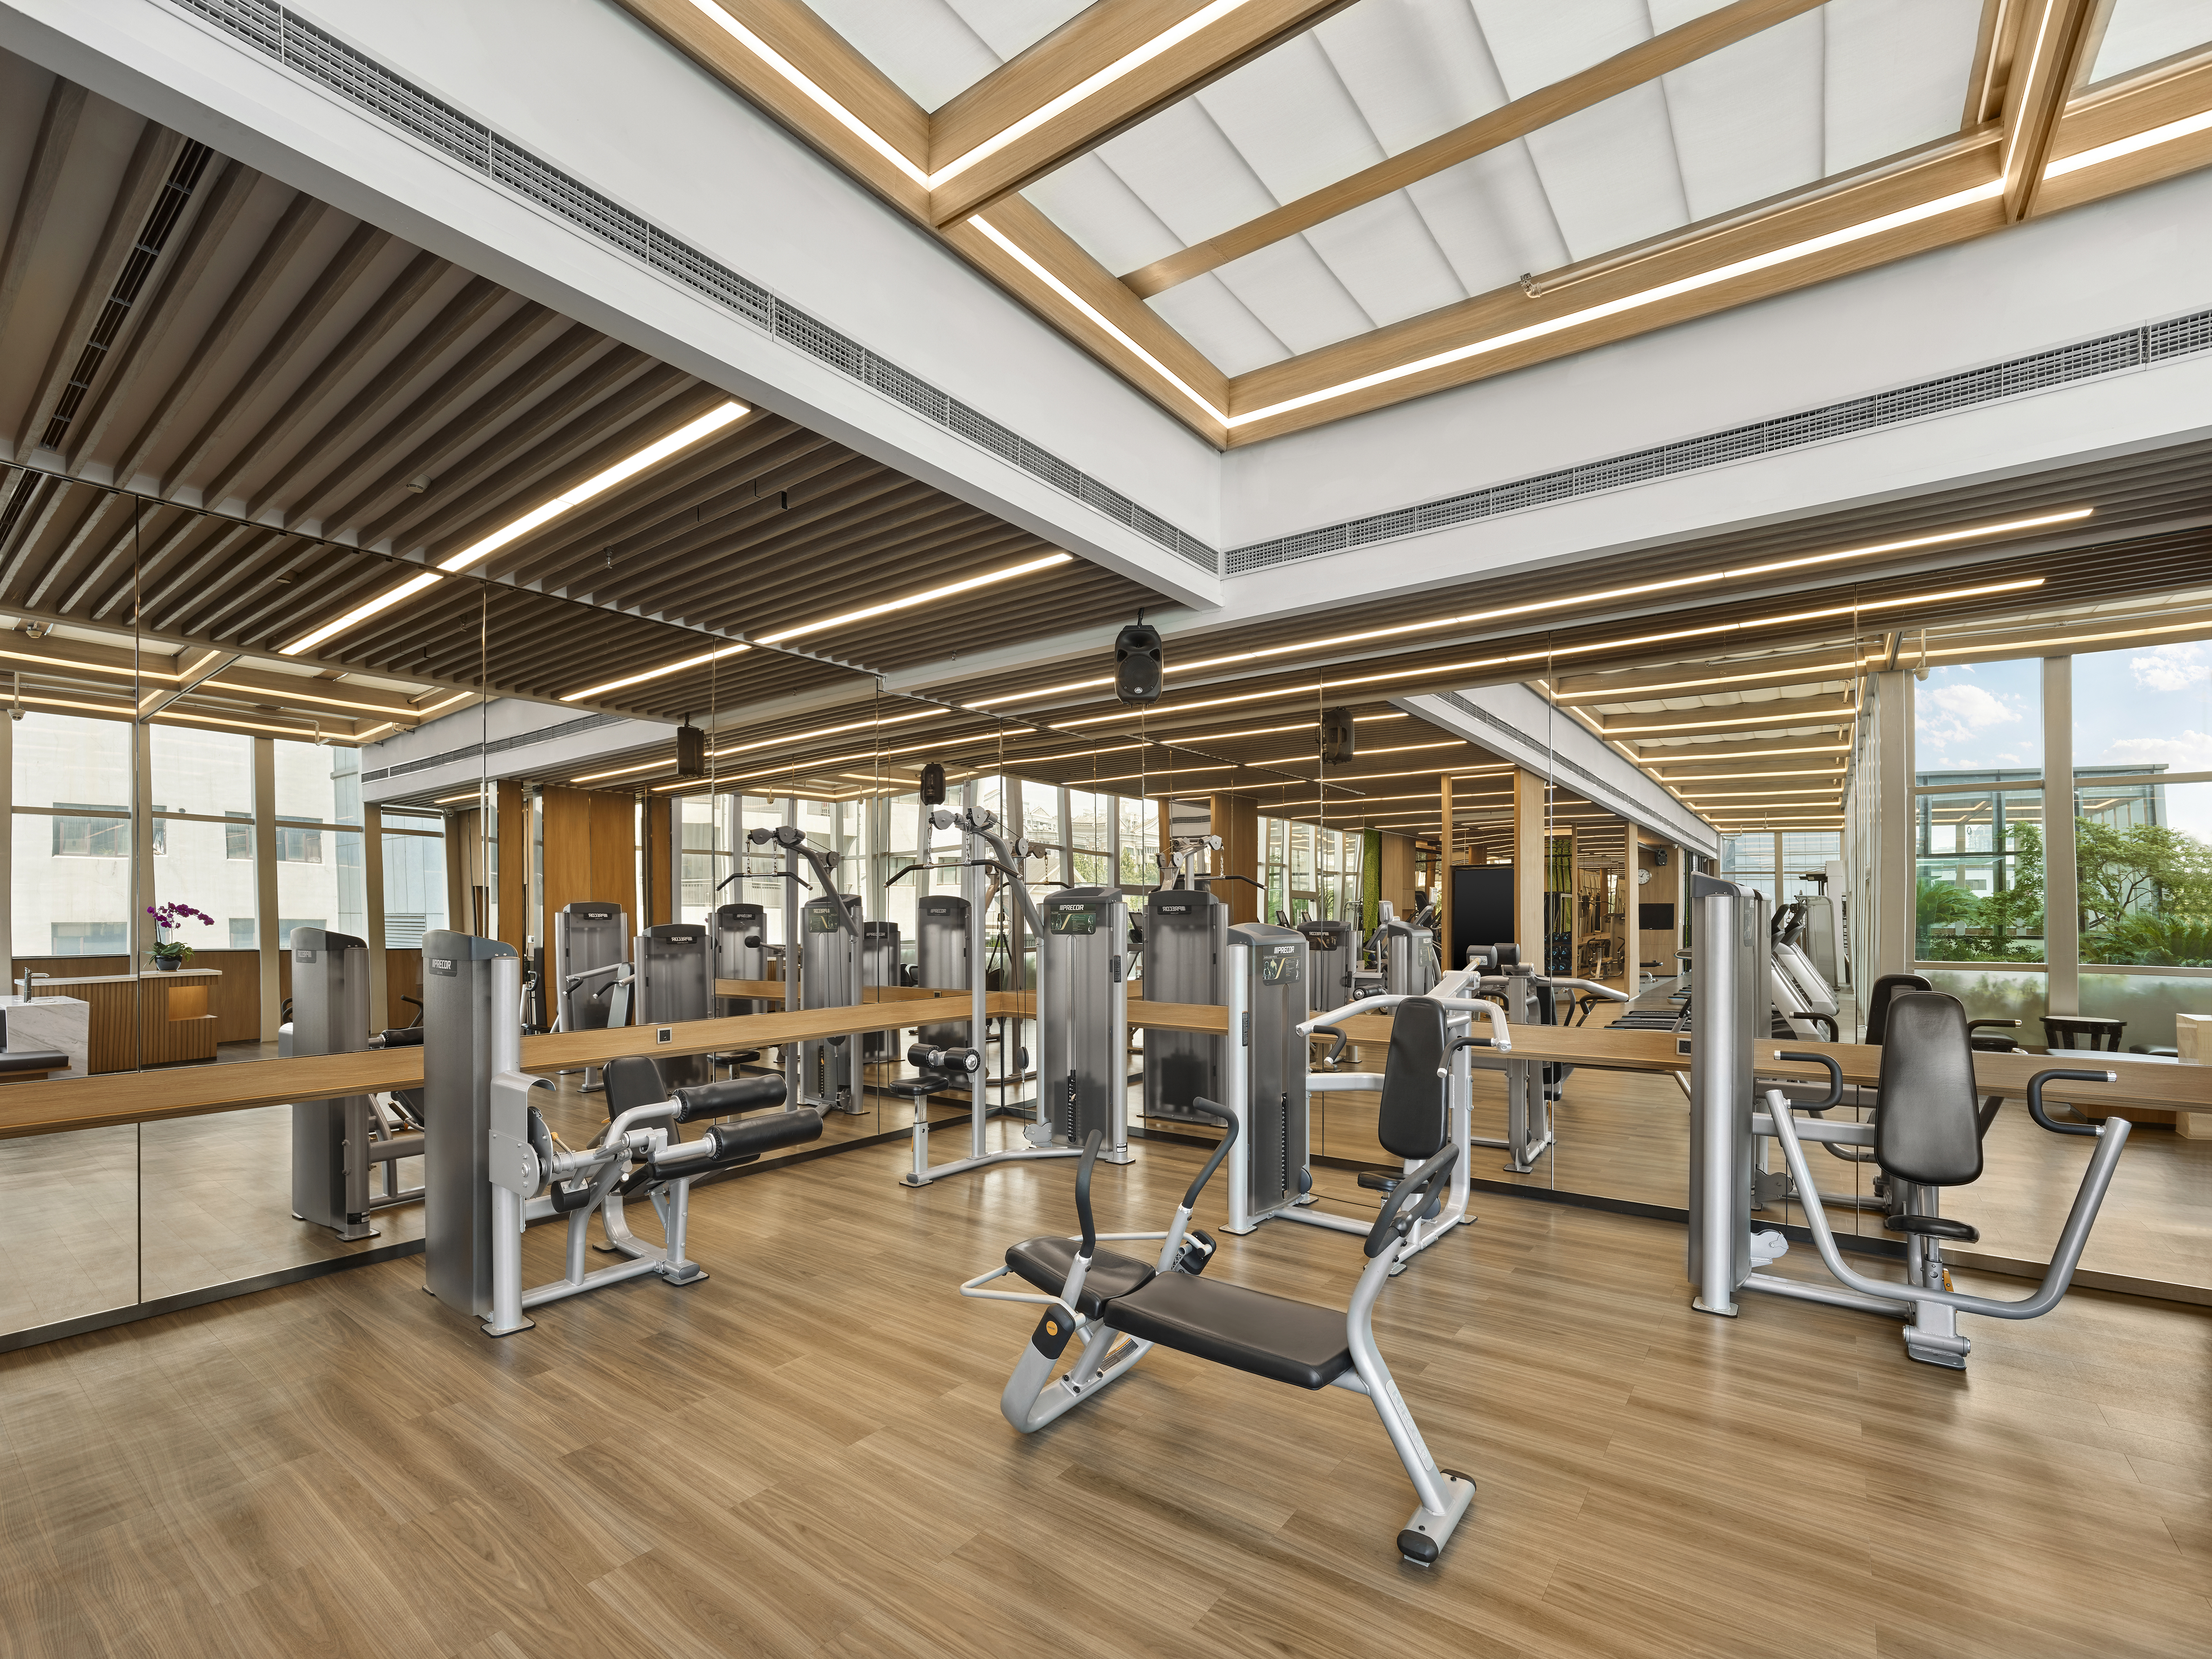 Fitness Center with weights machines